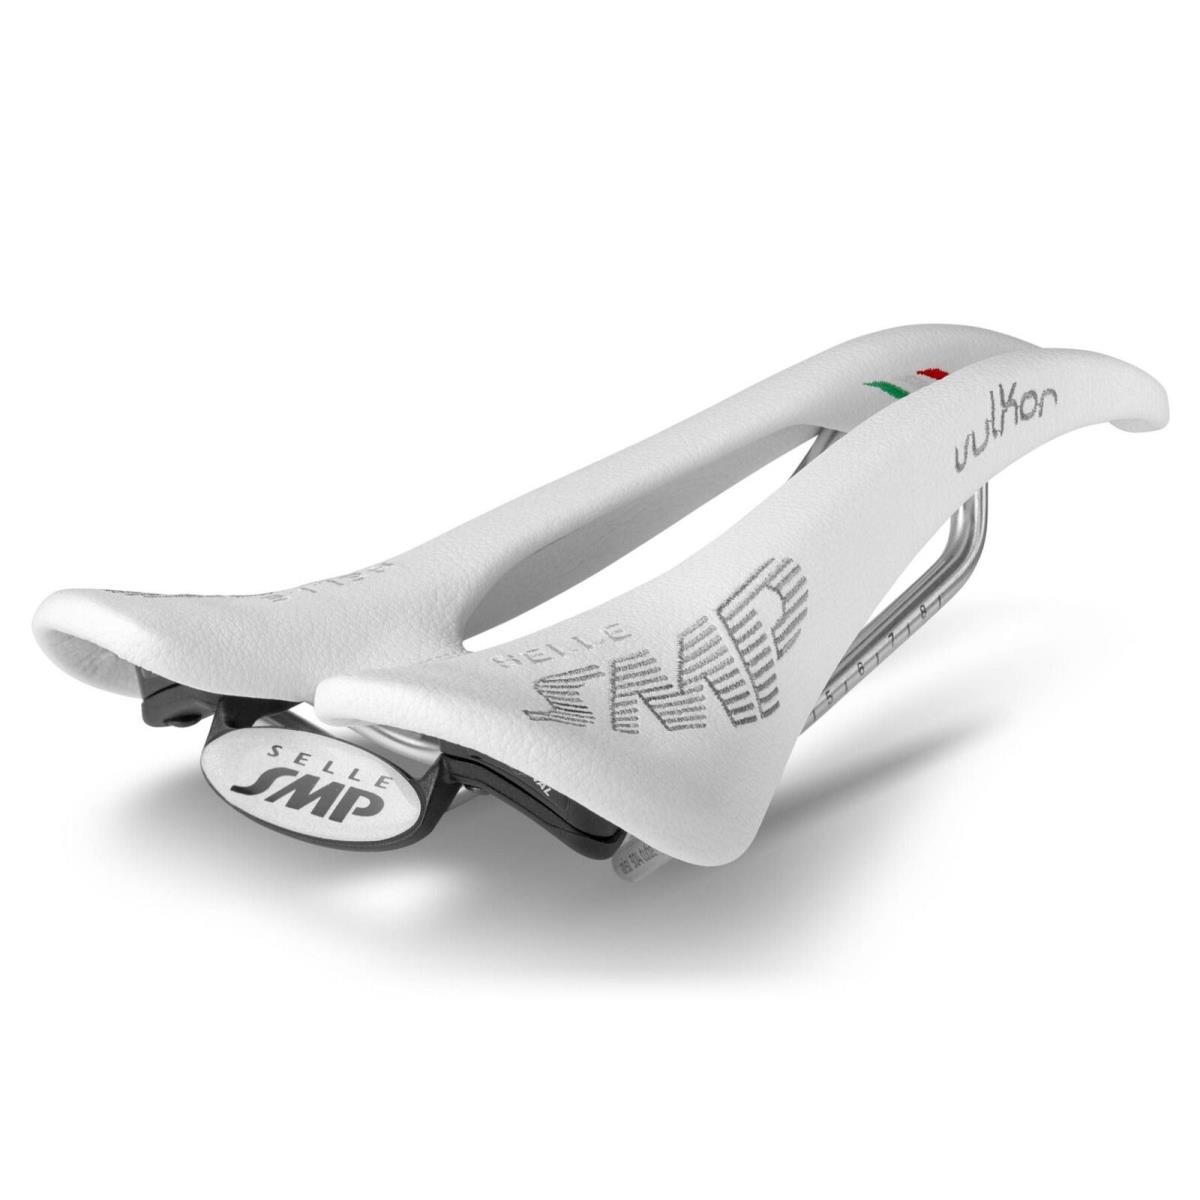 Selle Smp Vulkor Saddle with Steel Rails White